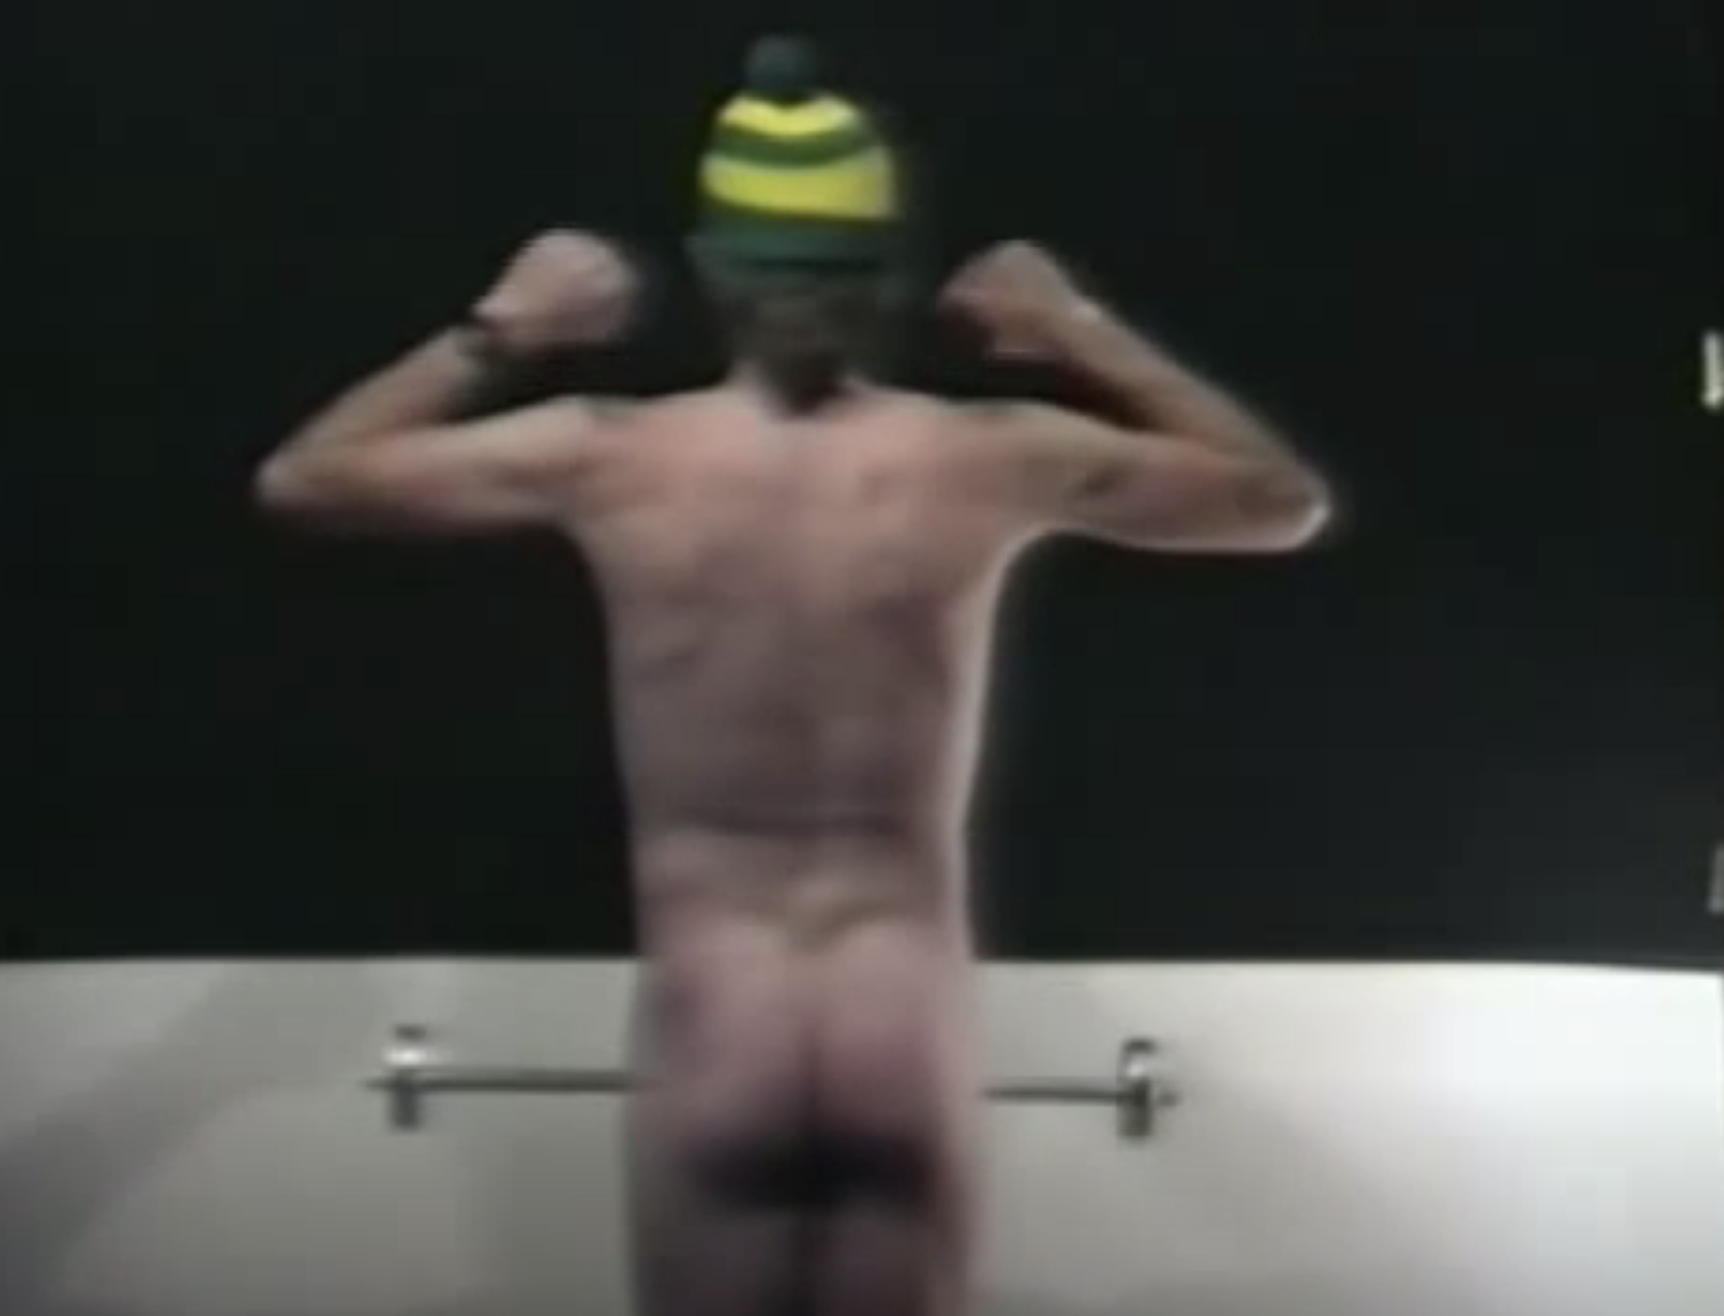 the man&#x27;s backside as he lifts a dumb bell